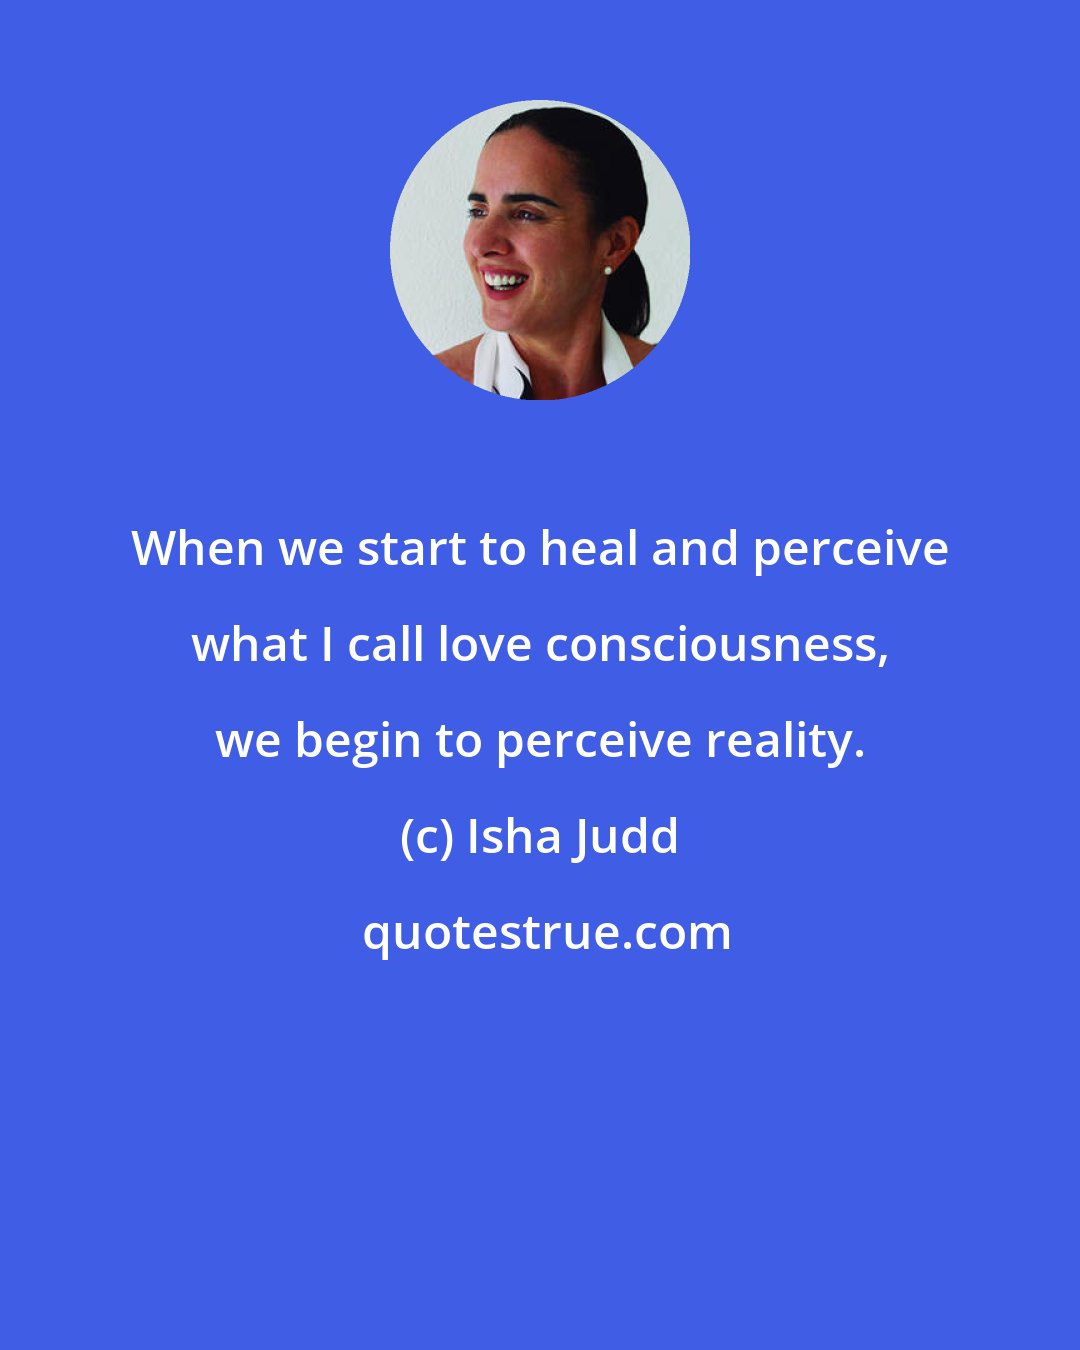 Isha Judd: When we start to heal and perceive what I call love consciousness, we begin to perceive reality.